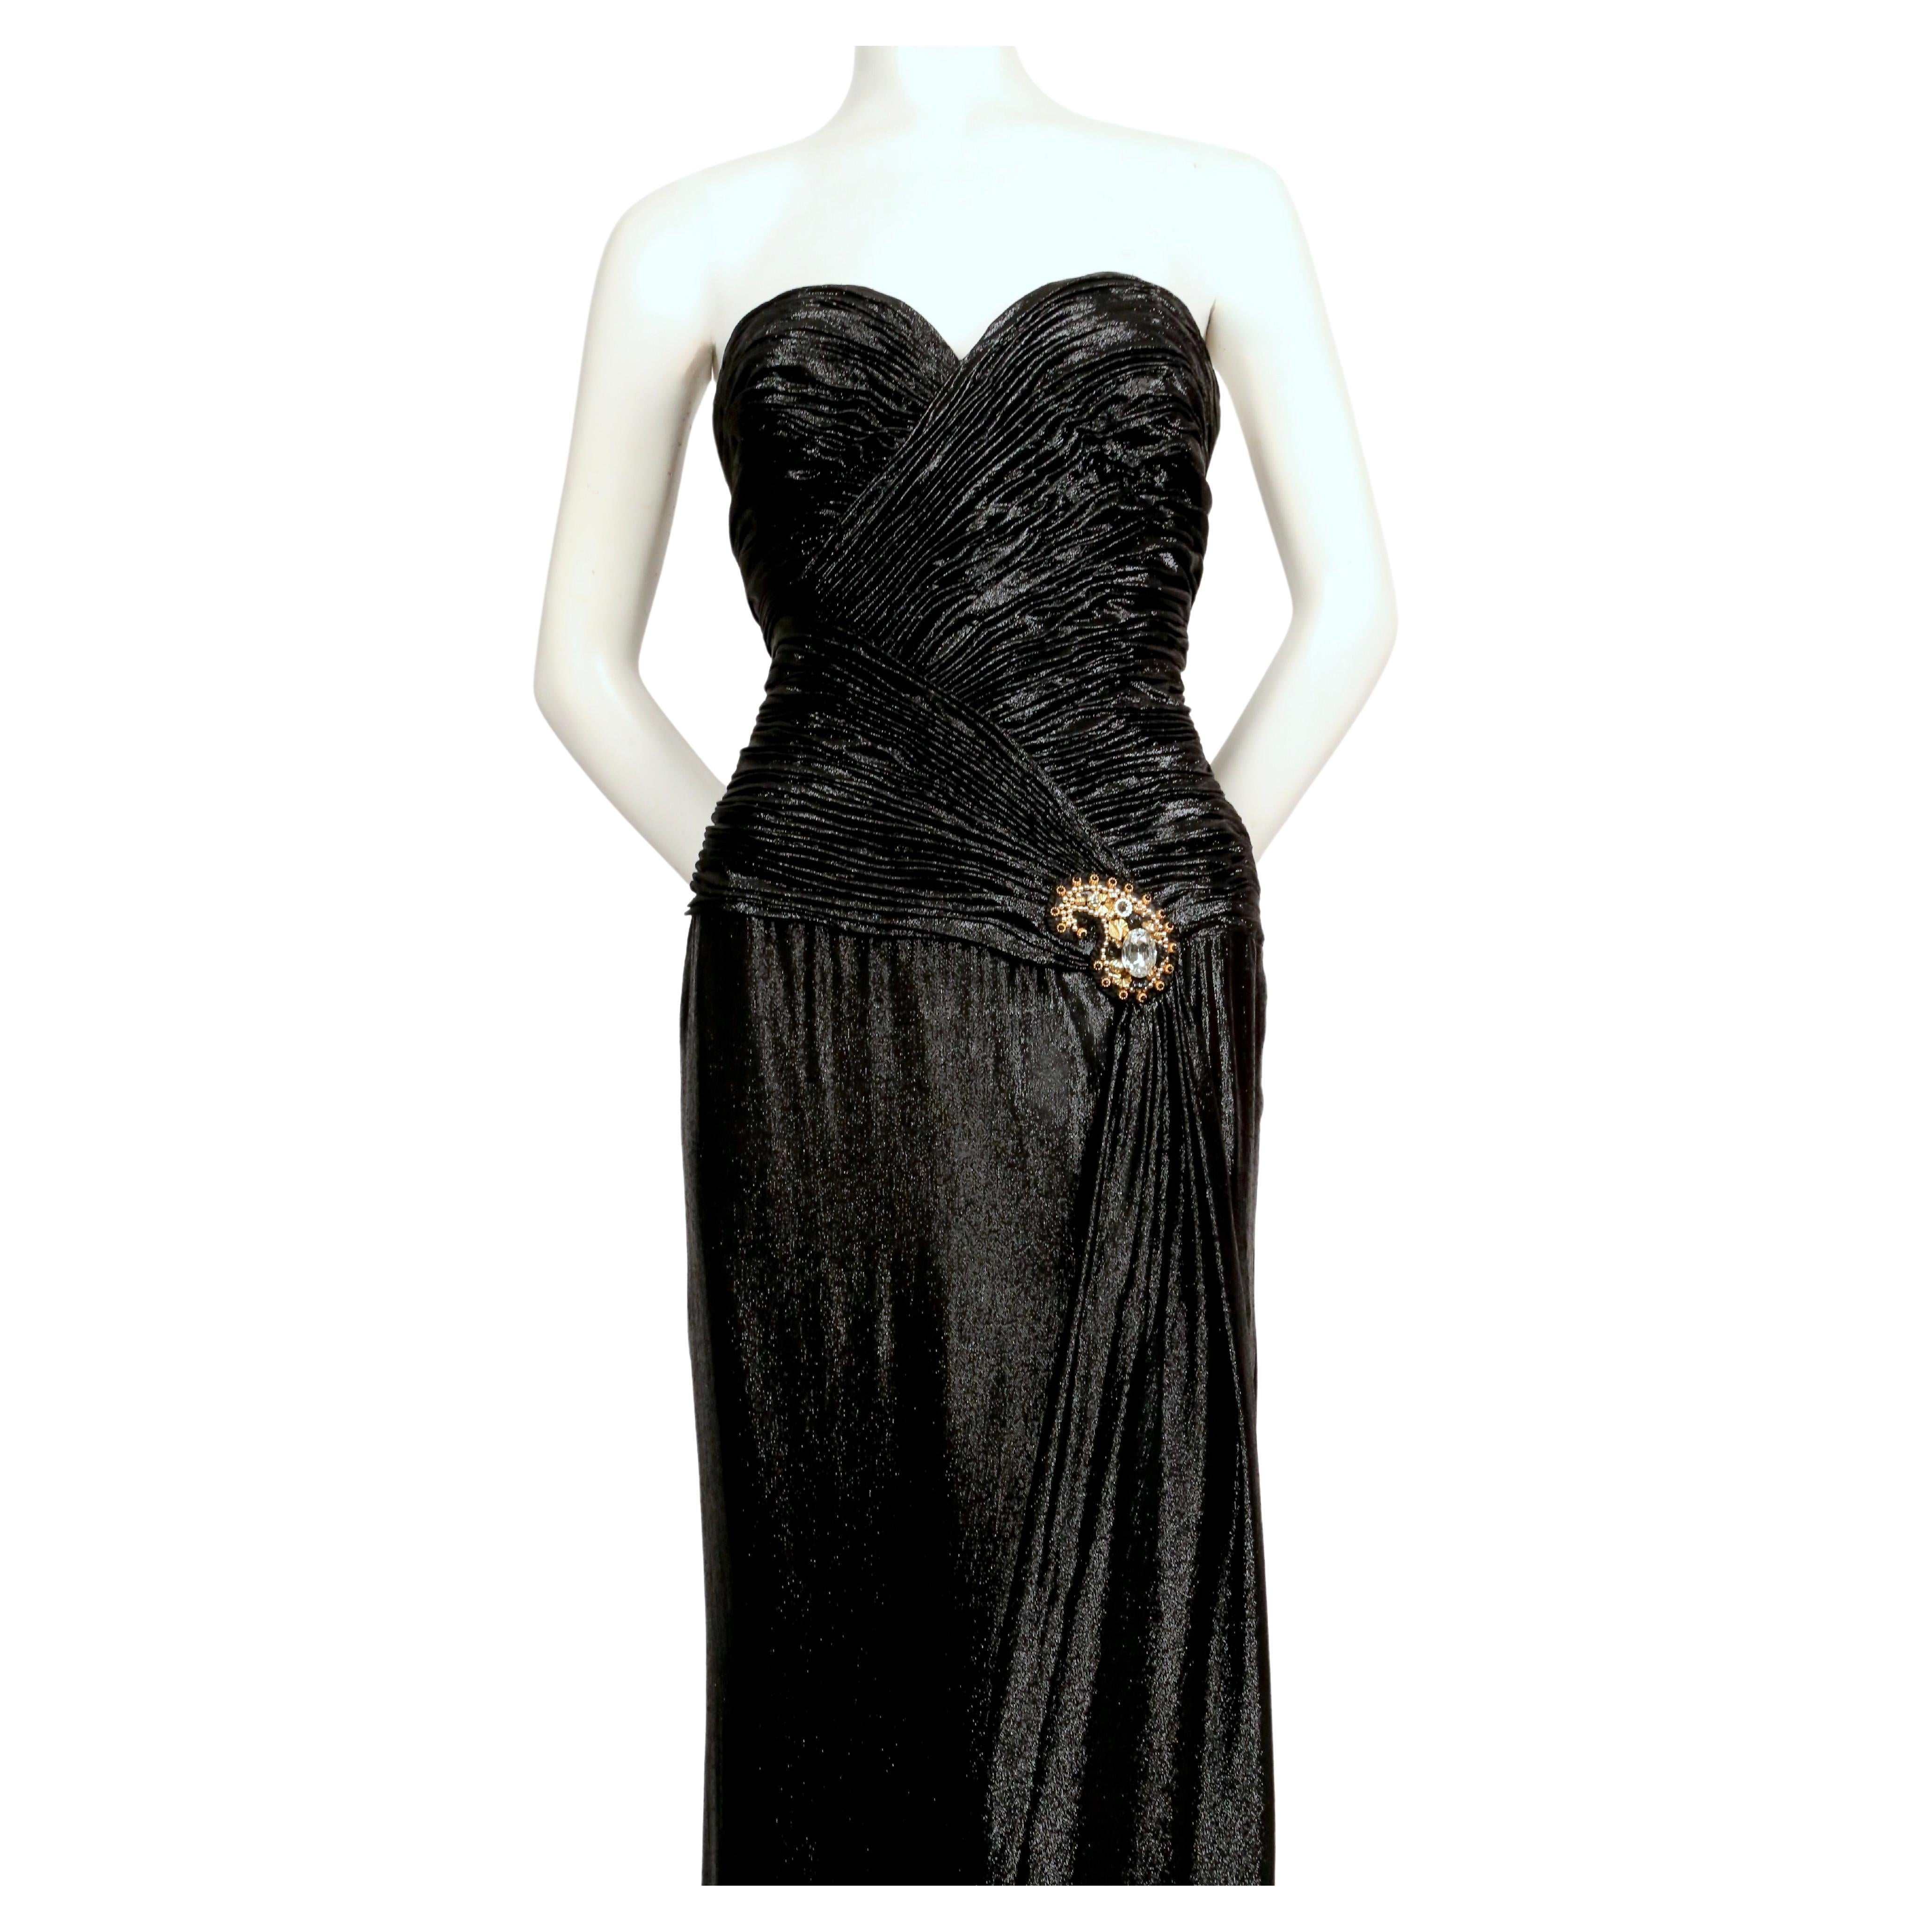 Metallic black dress with ruched bodice and beaded waist embellishment designed by Loris Azzaro dating to the early 1980's. No size indicated however this dress best fits a 4-6.  Measures approximately 34